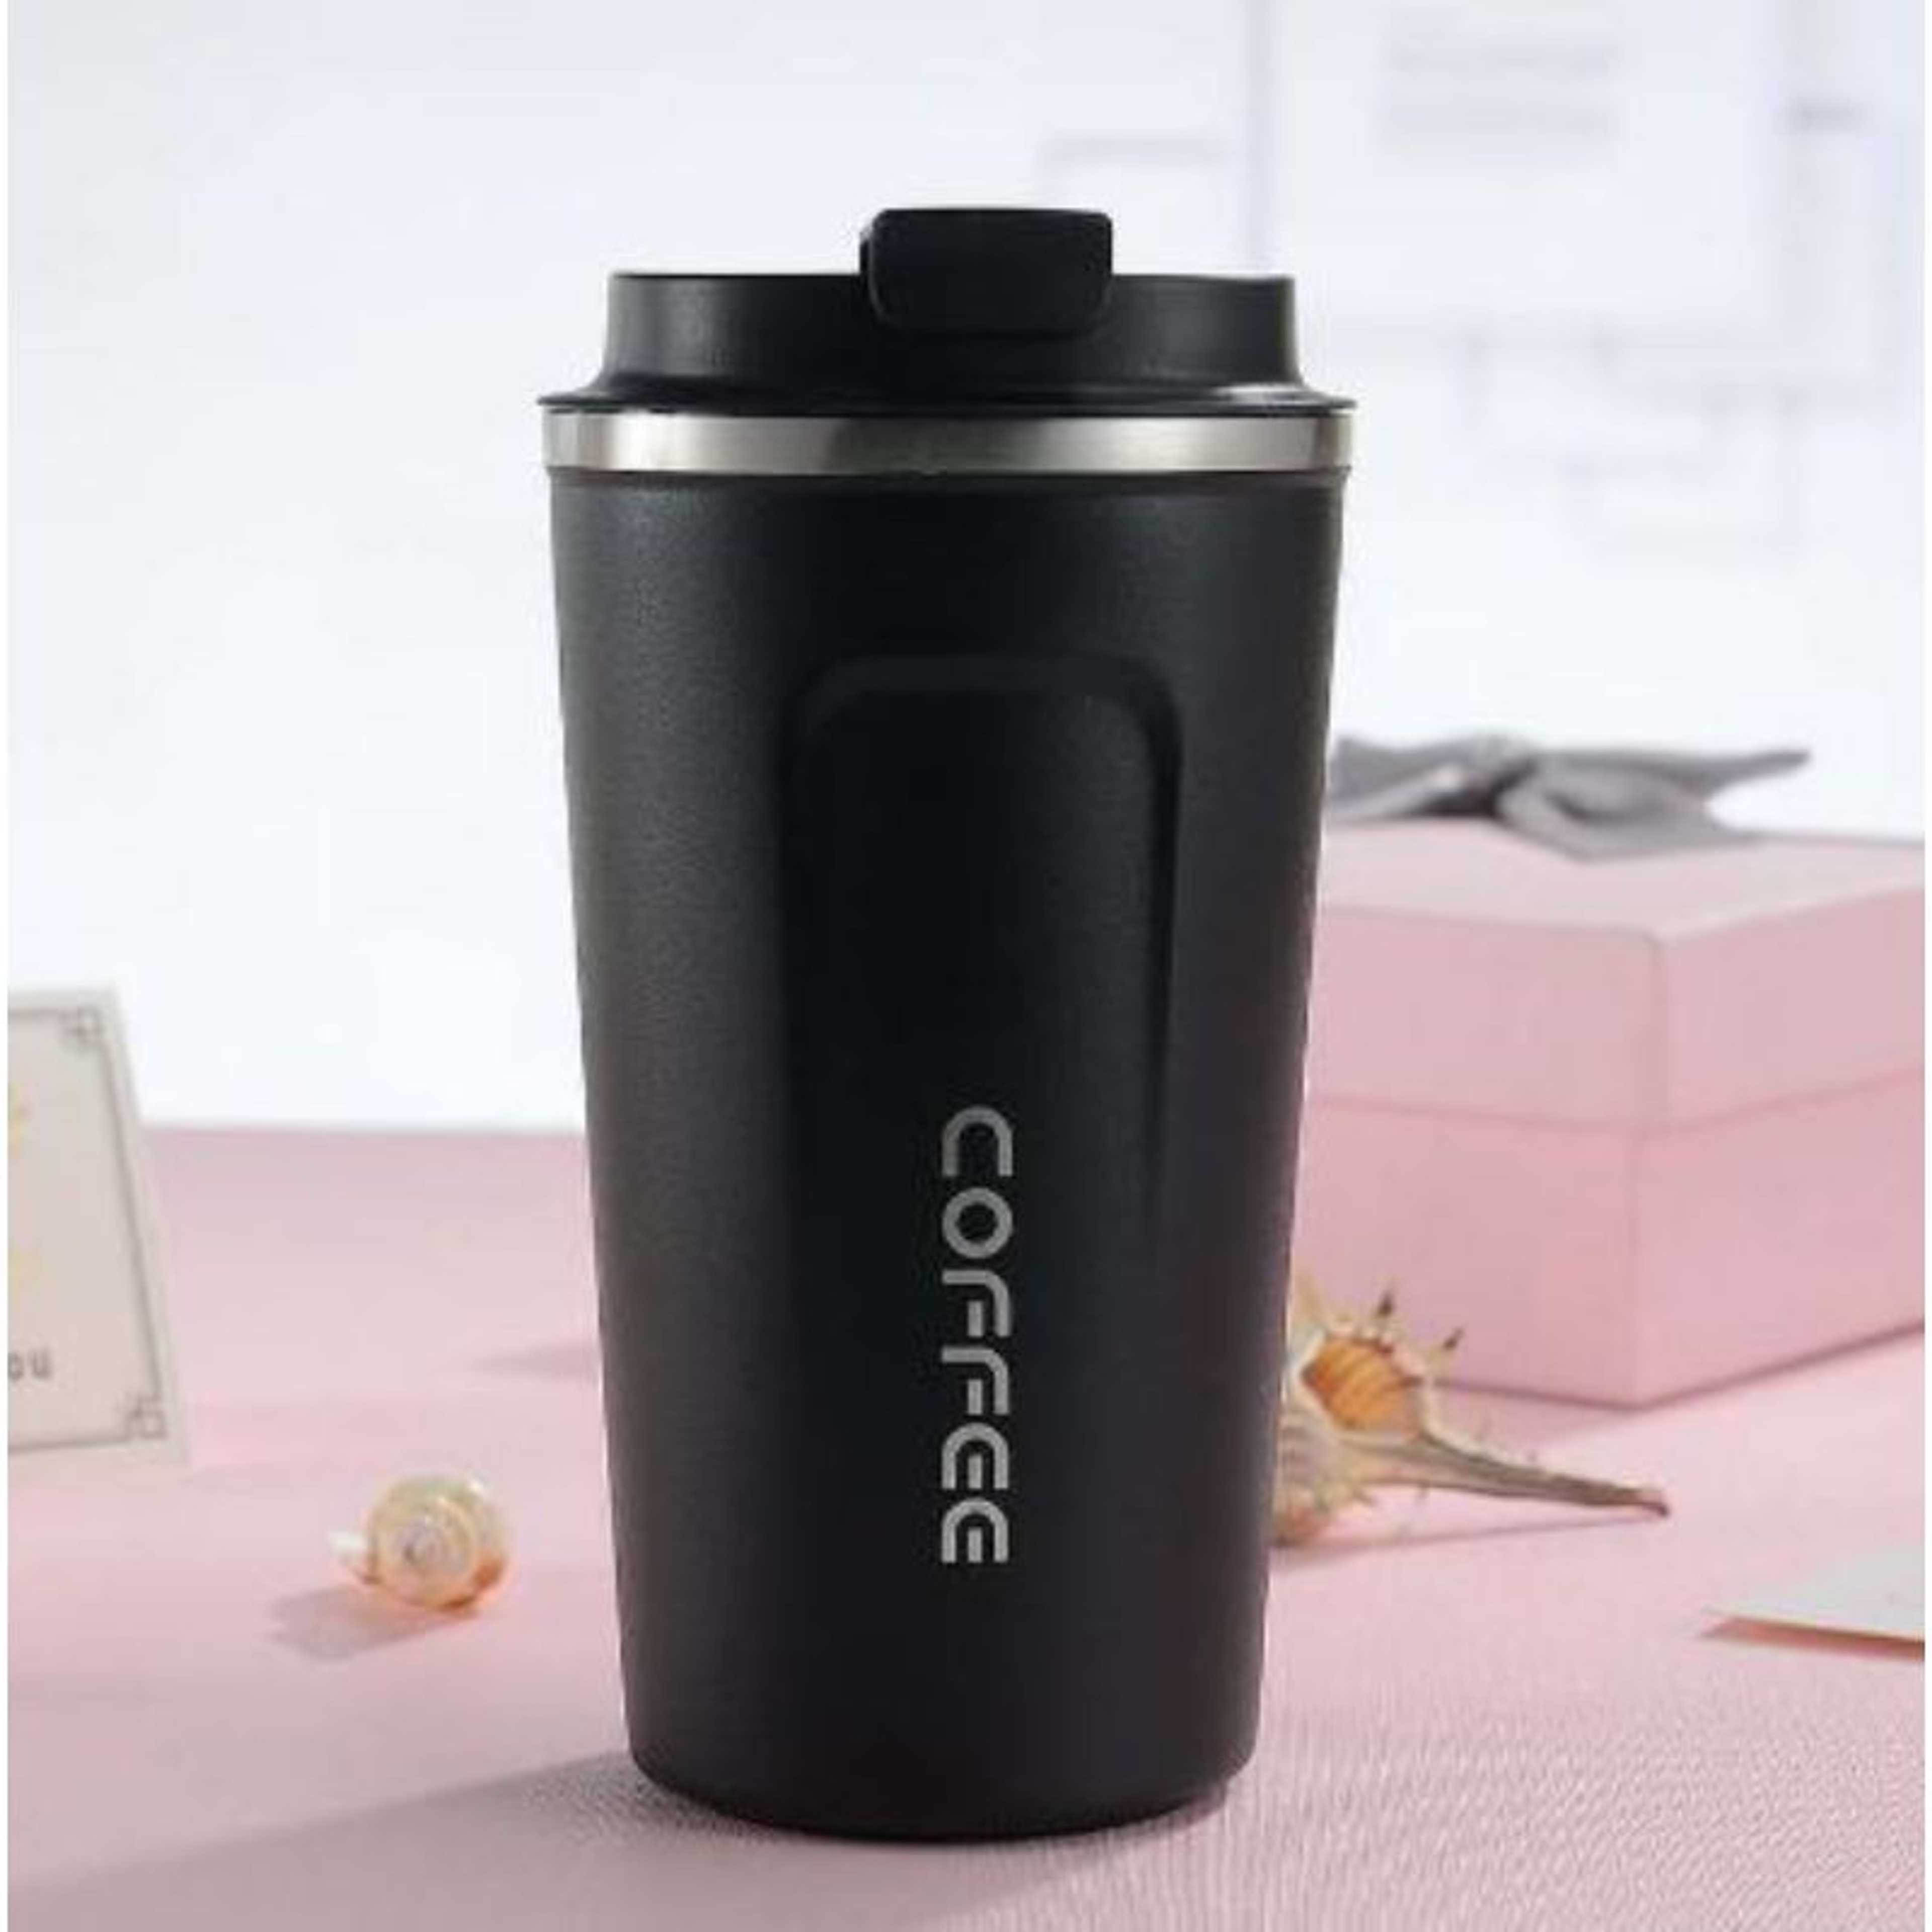 Reusable 500ml Vacuum Insulated Coffee Tumbler, Vacuum Insulated Coffee Travel Mug Spill Proof with Lid, Water Tumbler With Screw Lid, Portable Coffee Cup, Coffee Mug, Portable Coffee Tumbler, Stainless Steel Vacuum Insulated Coffee Thermos Cup